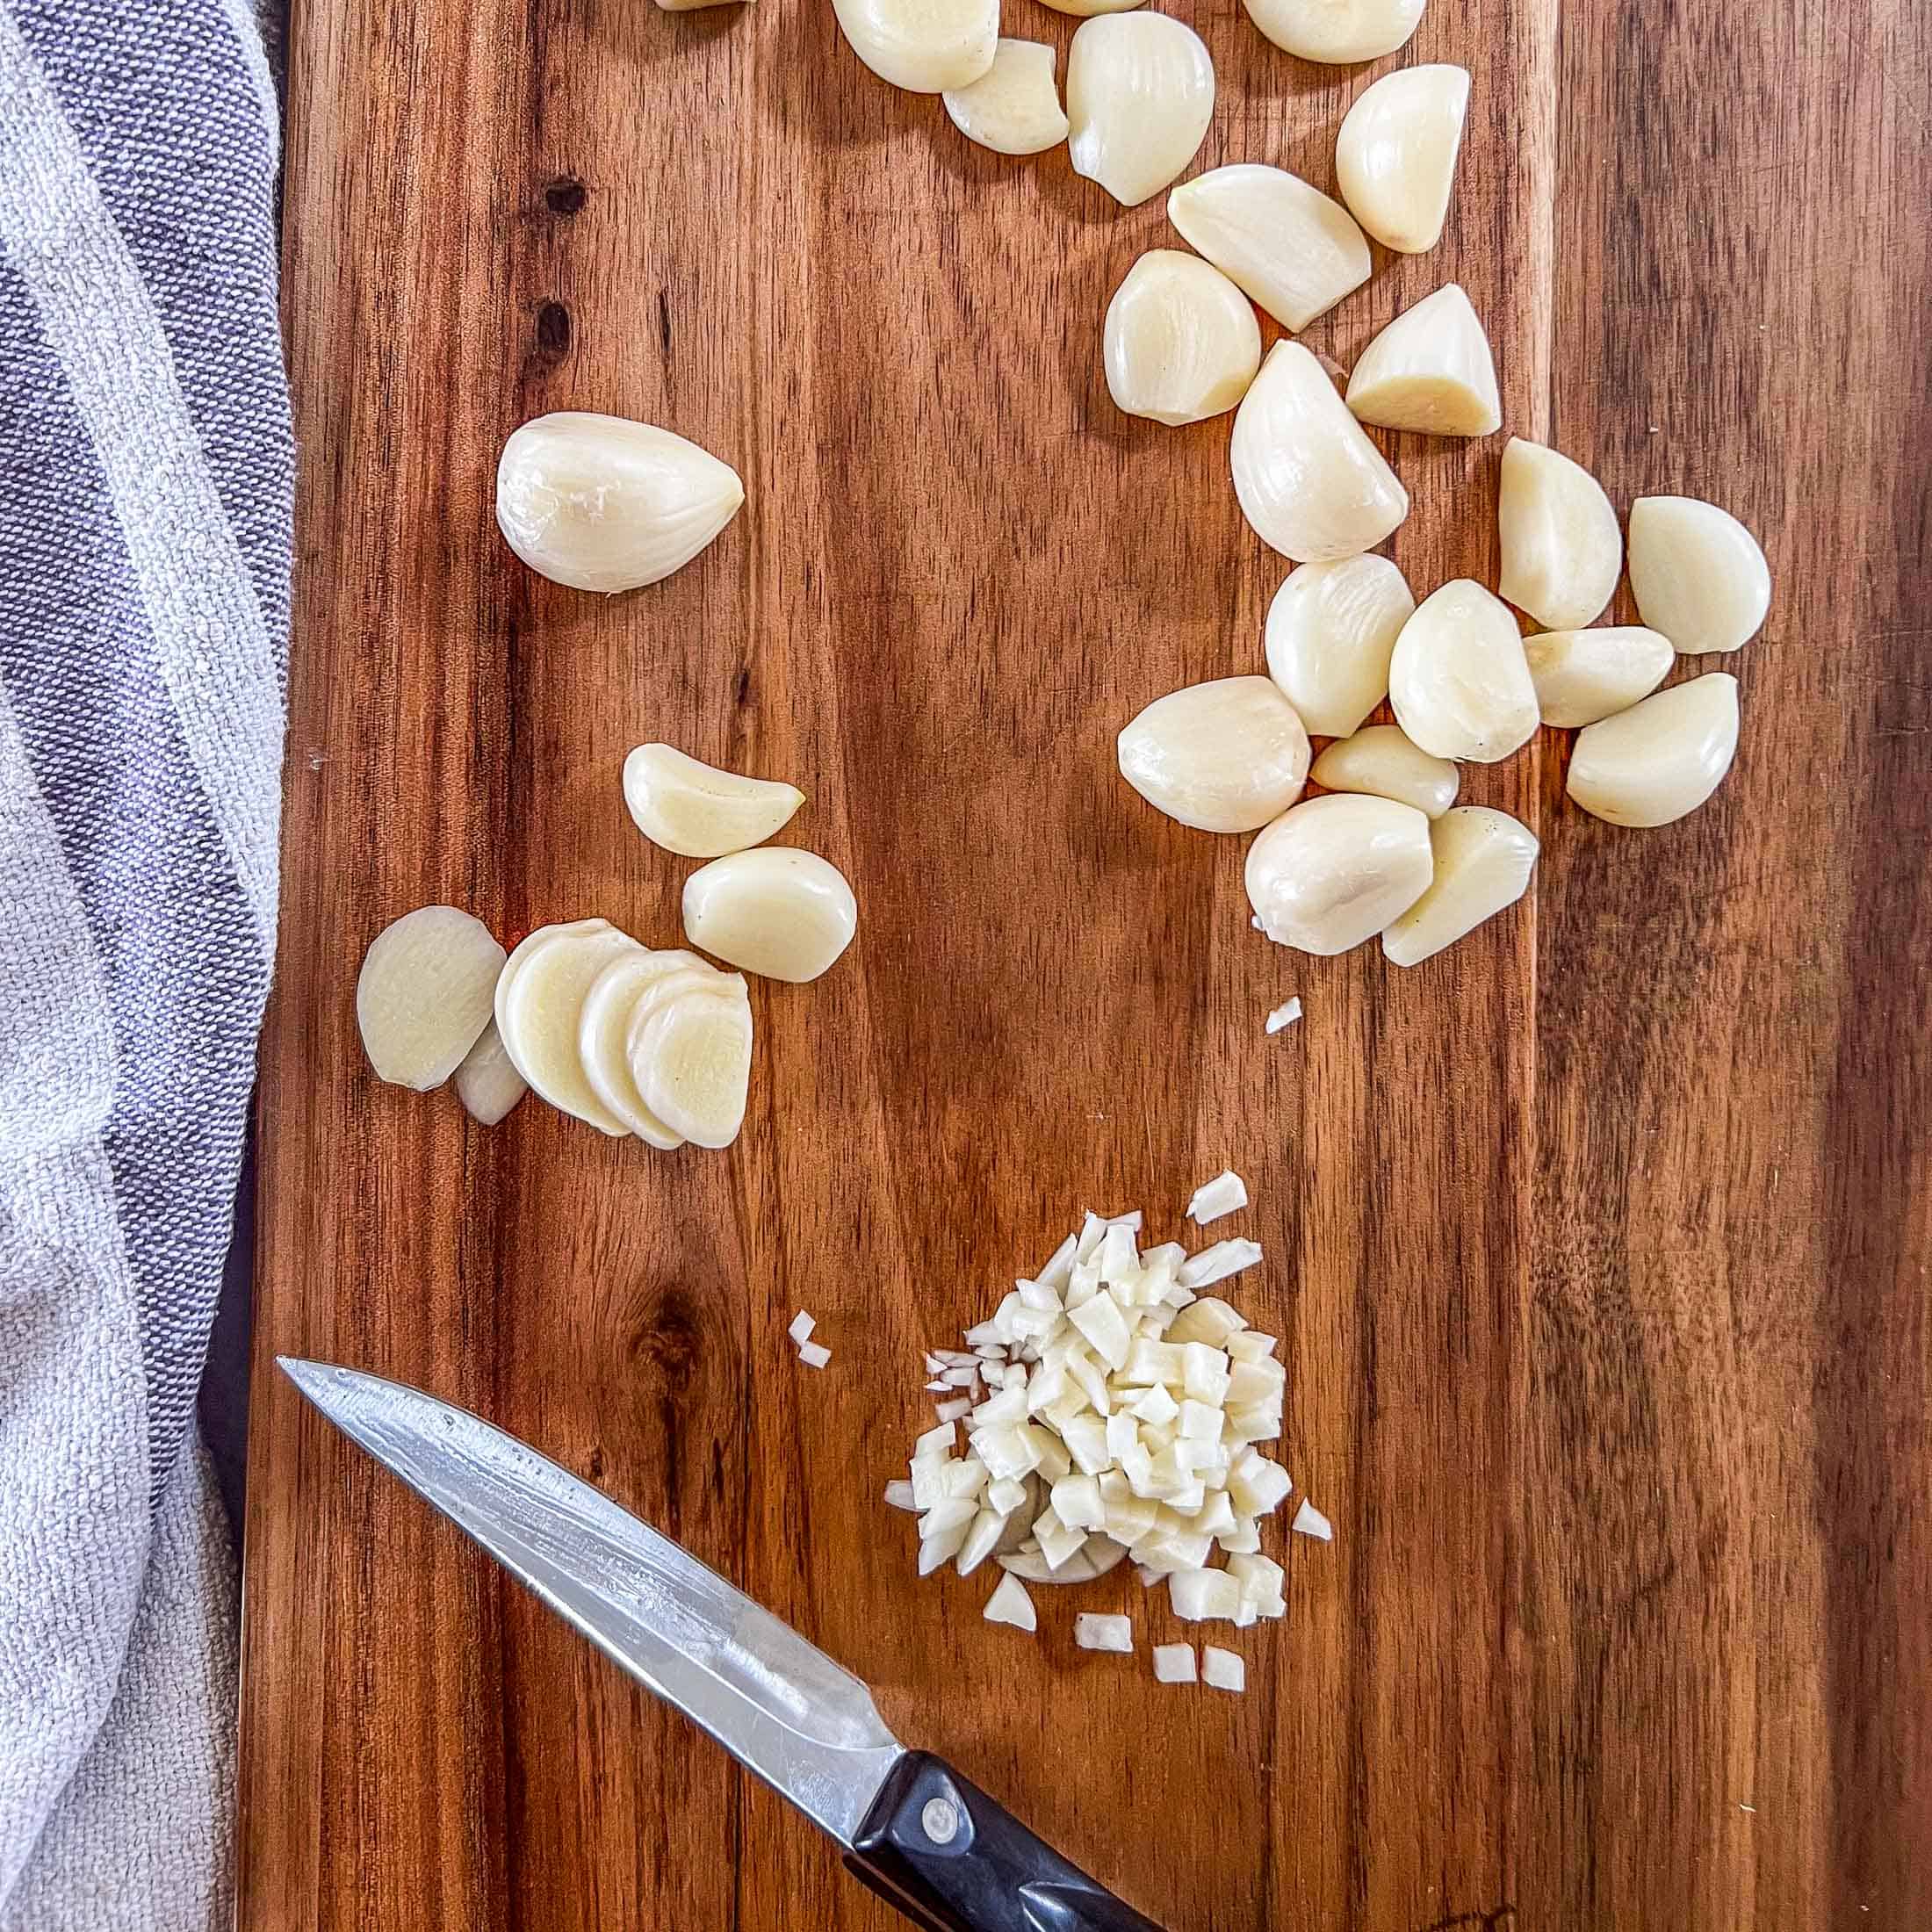 Slices of raw garlic and small pieces of garlic on a wooden cutting board.